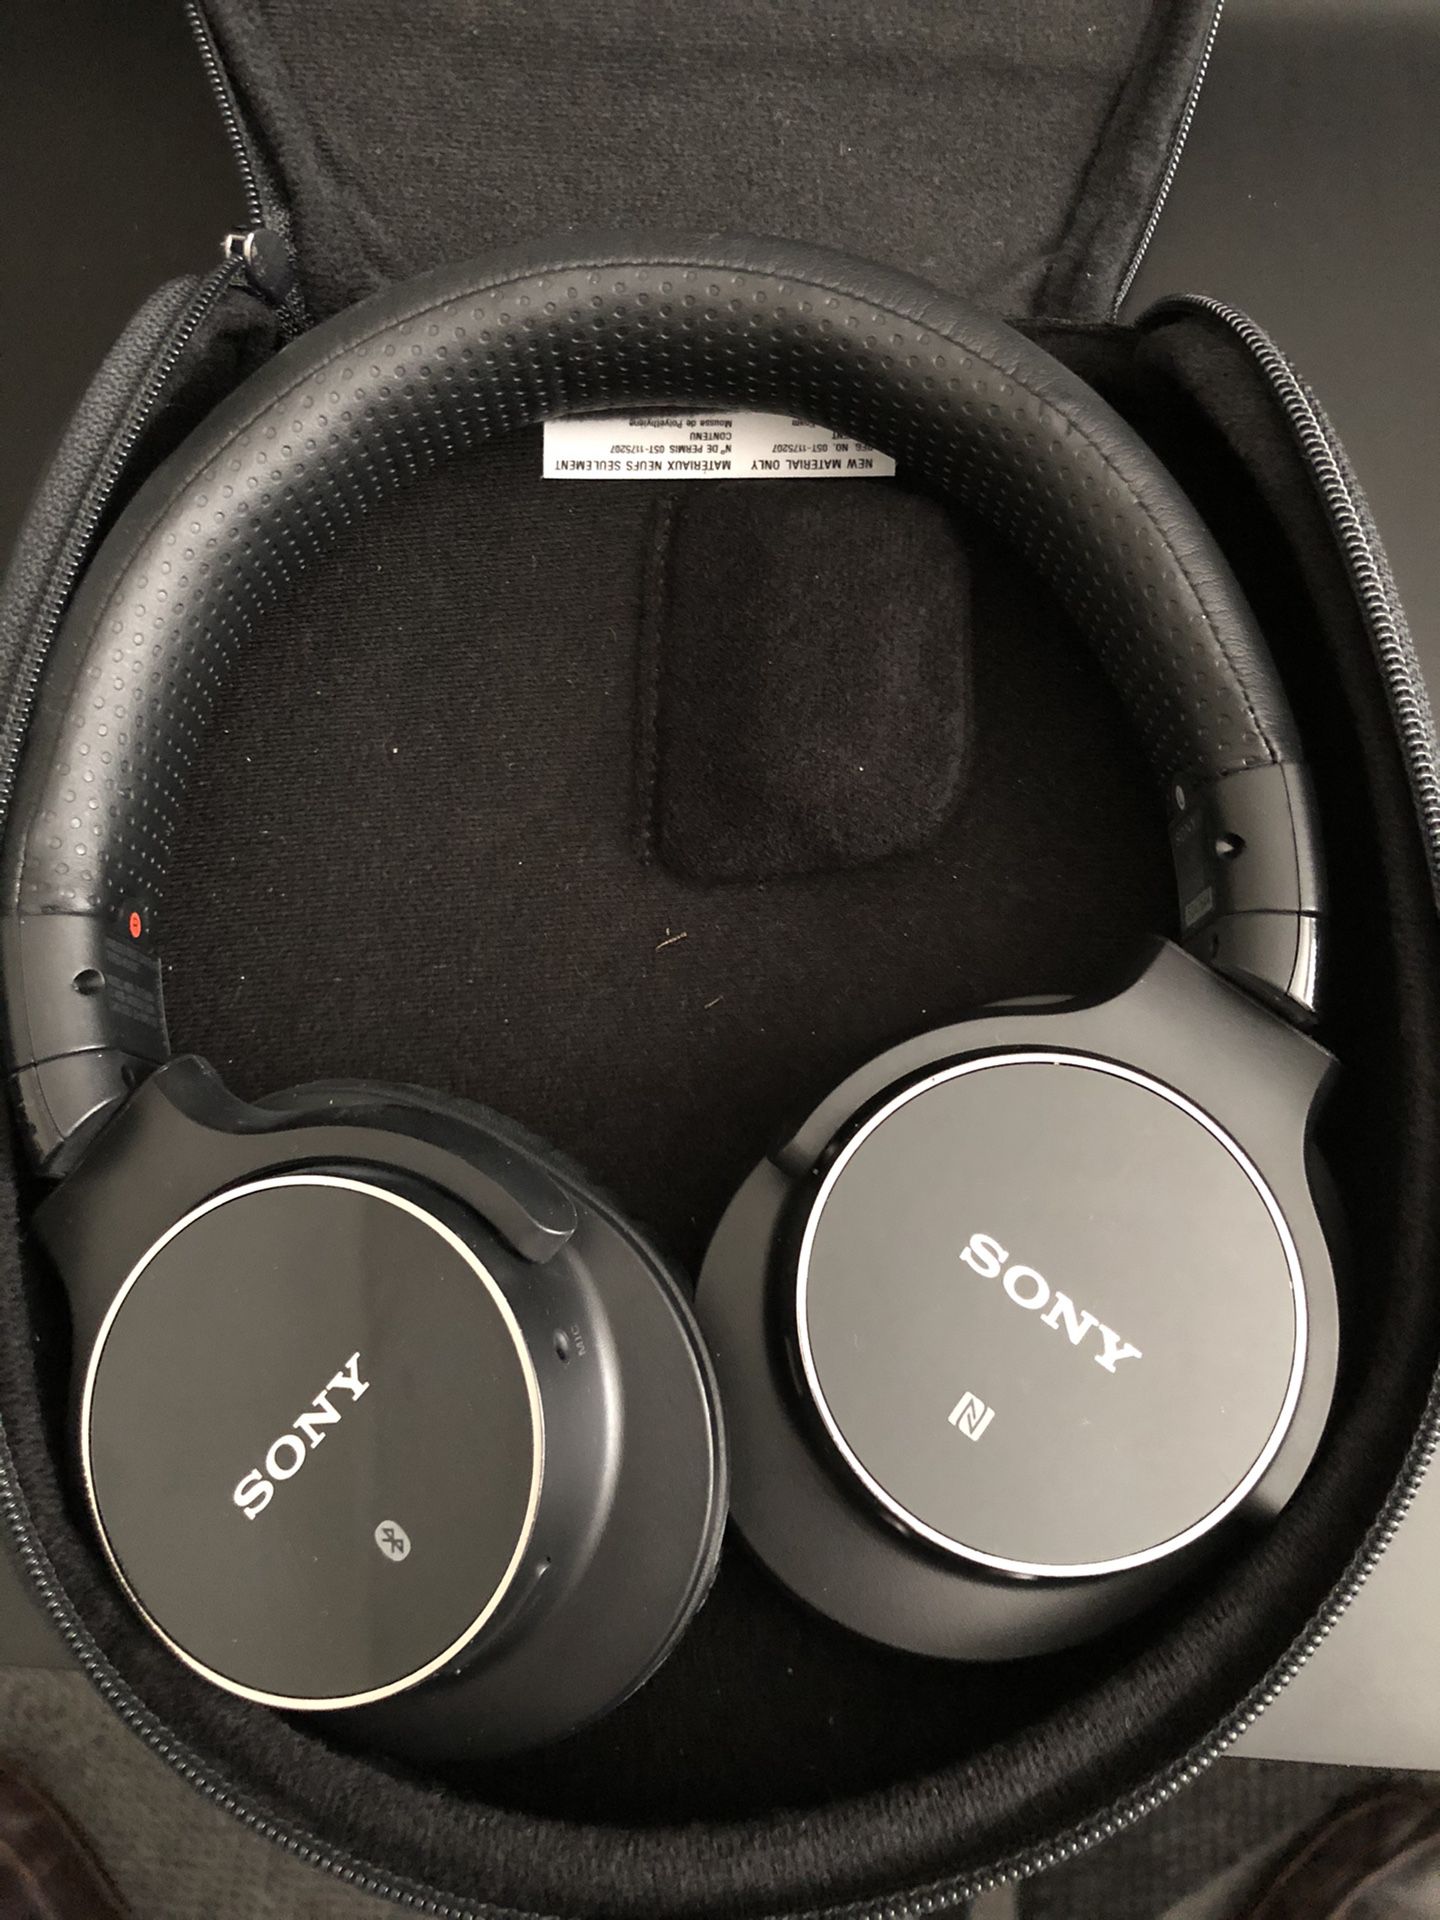 Sony Bluetooth Noise Cancelling Headphones